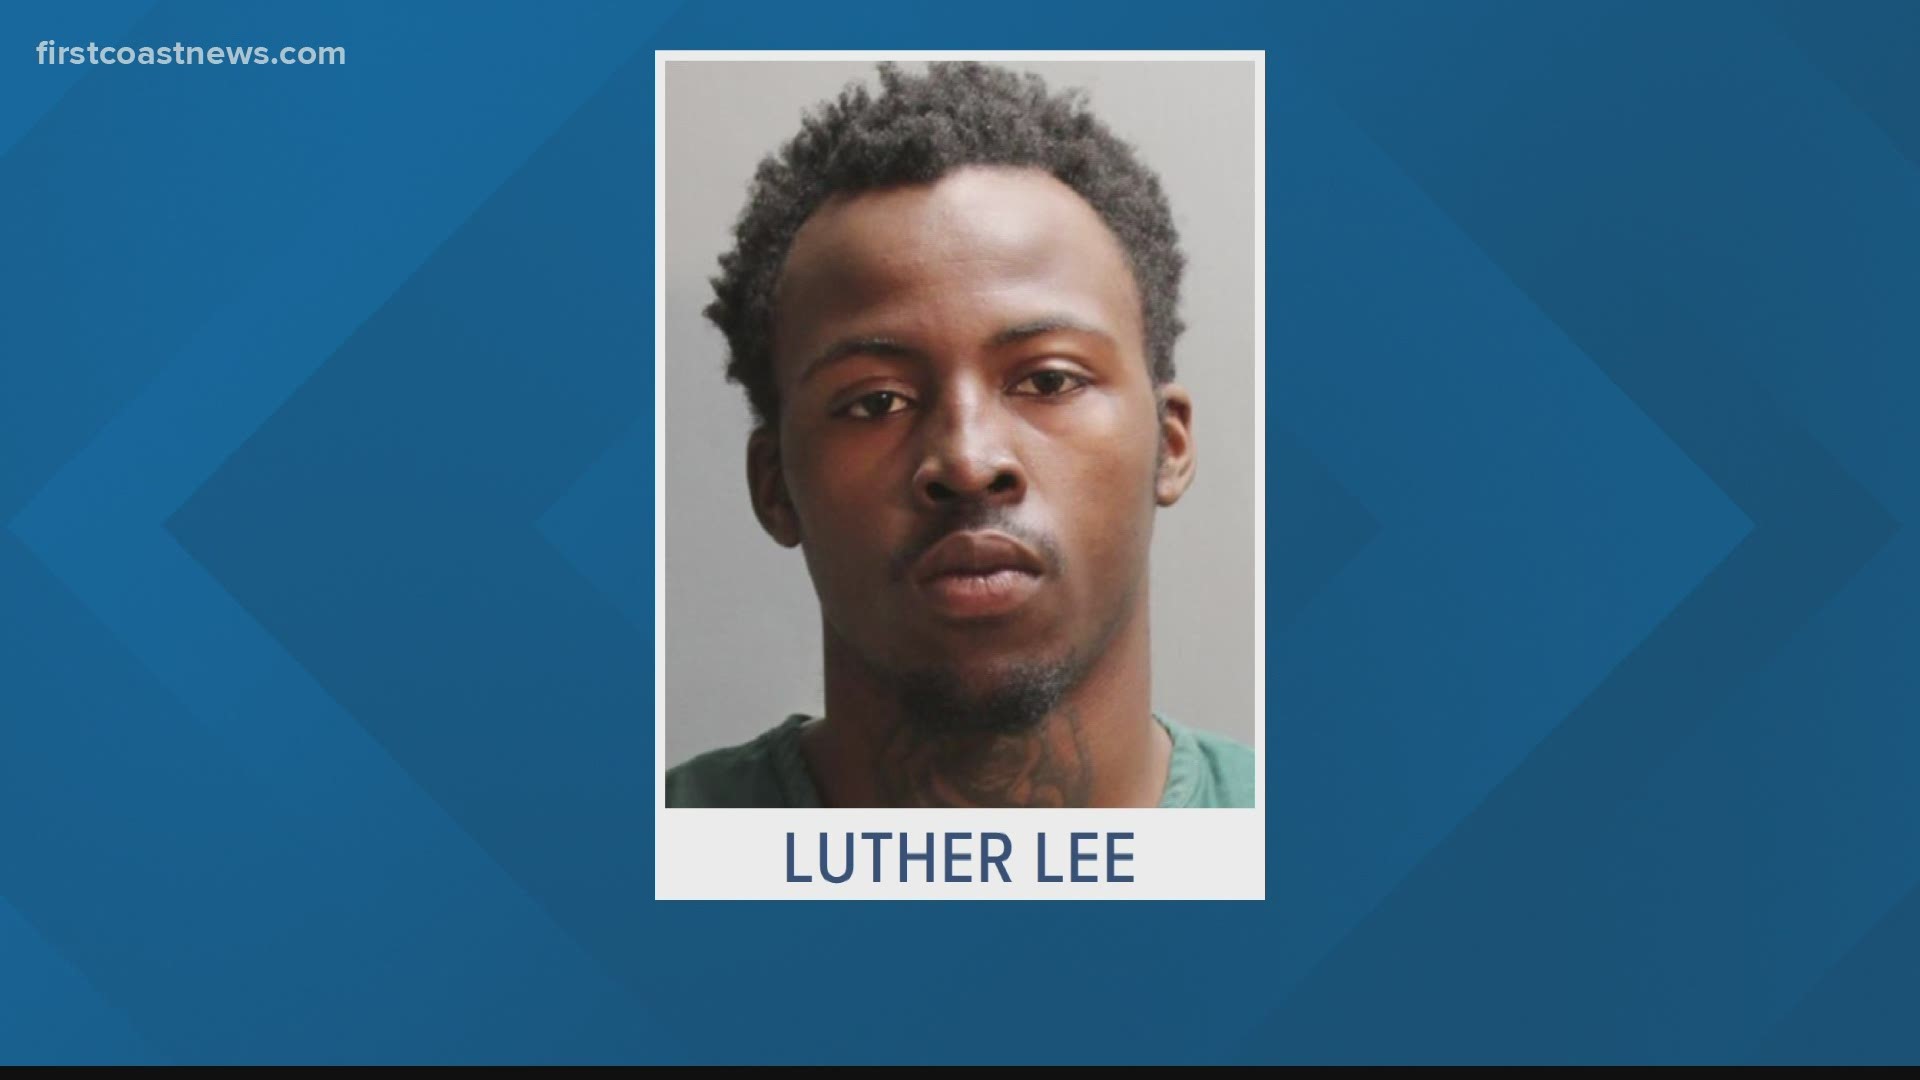 If you know where Luther Lee might be, you should call the JSO or Crime Stoppers.